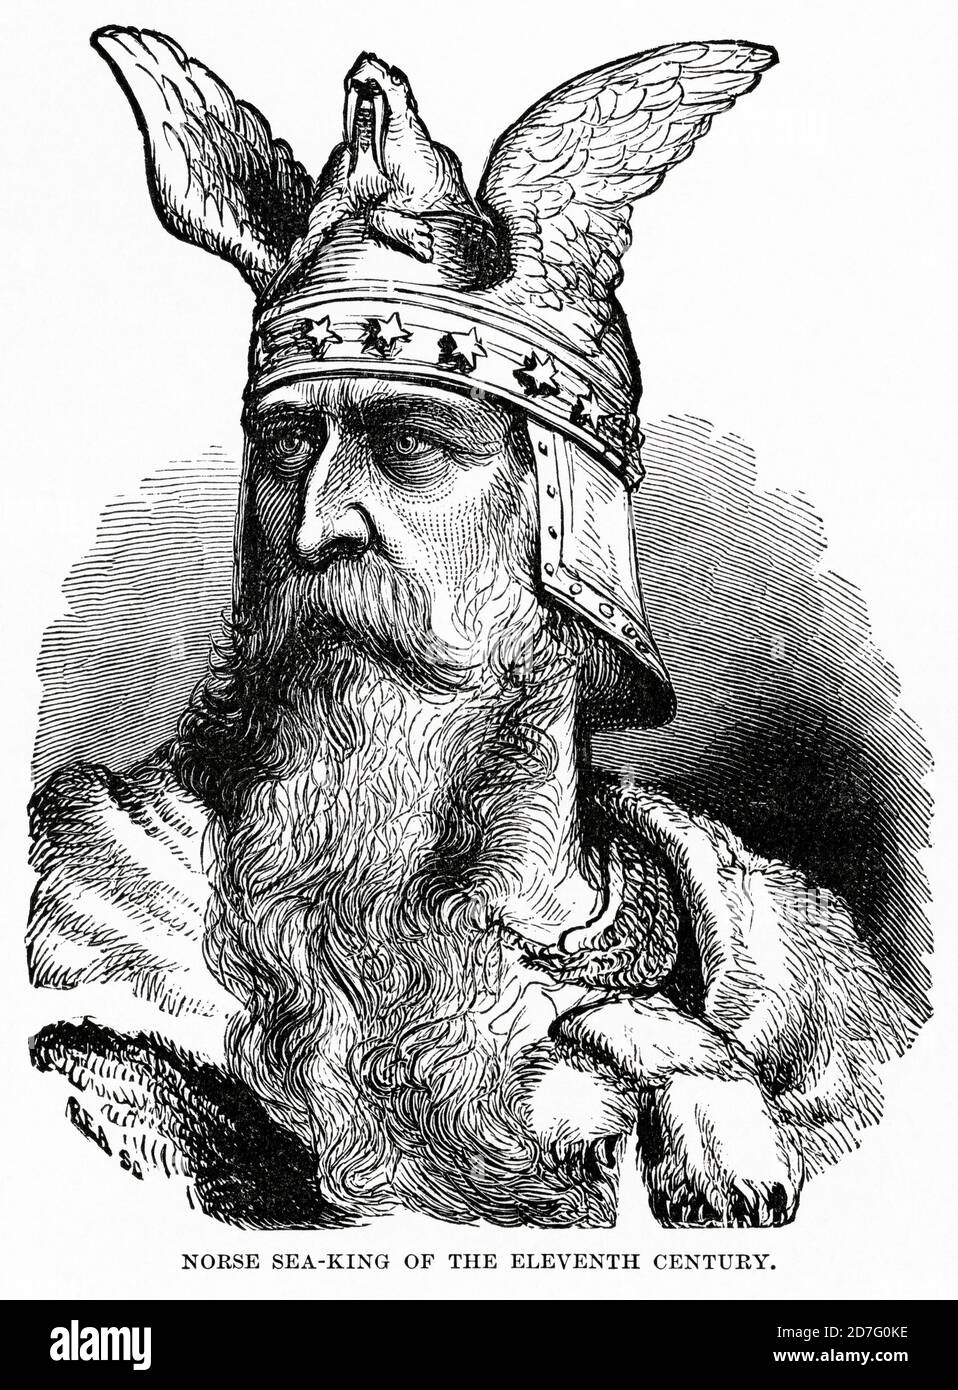 Norse Sea-King of the Eleventh Century, Illustration, Ridpath's History of the World, Volume III, by John Clark Ridpath, LL. D., Merrill & Baker Publishers, New York, 1897 Stock Photo